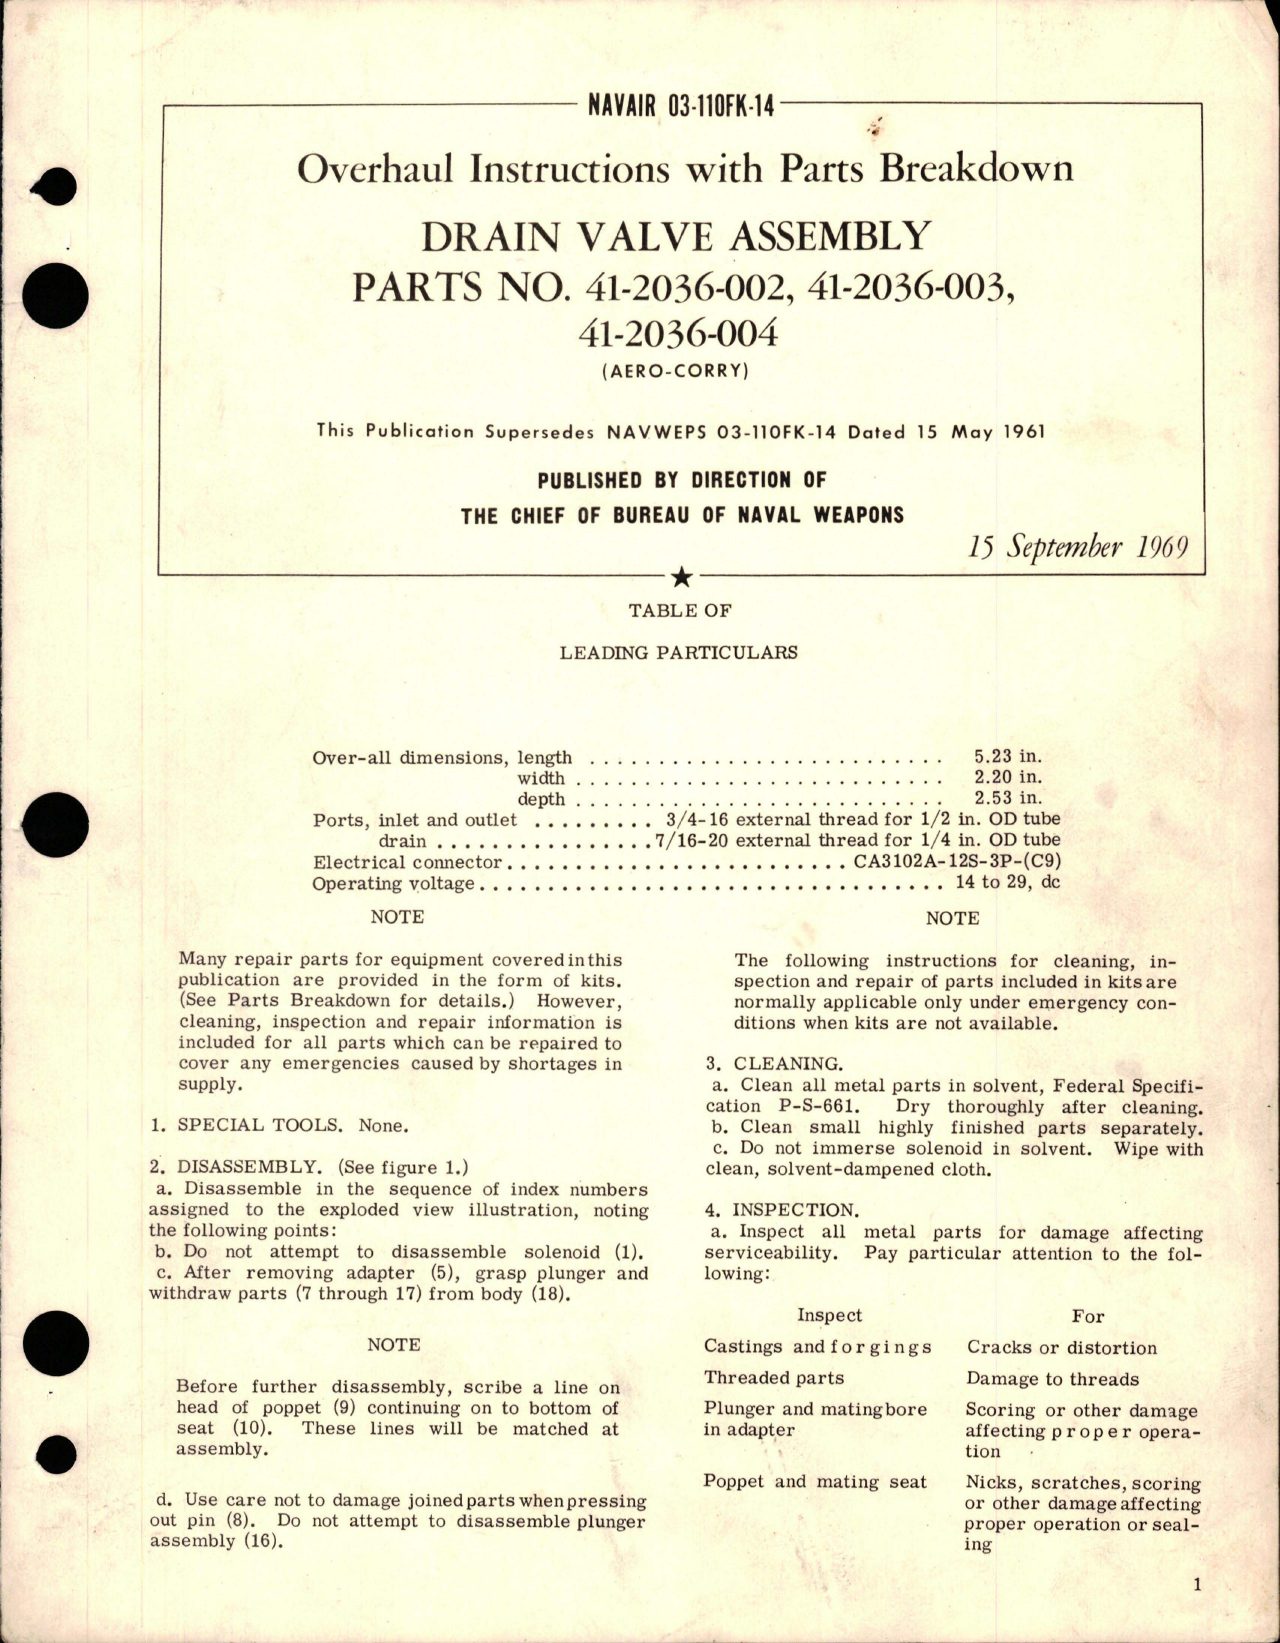 Sample page 1 from AirCorps Library document: Overhaul Instructions with Parts Breakdown for Drain Valve Assembly - Parts 41-2036-002, 41-2036-003, and 41-2036-004